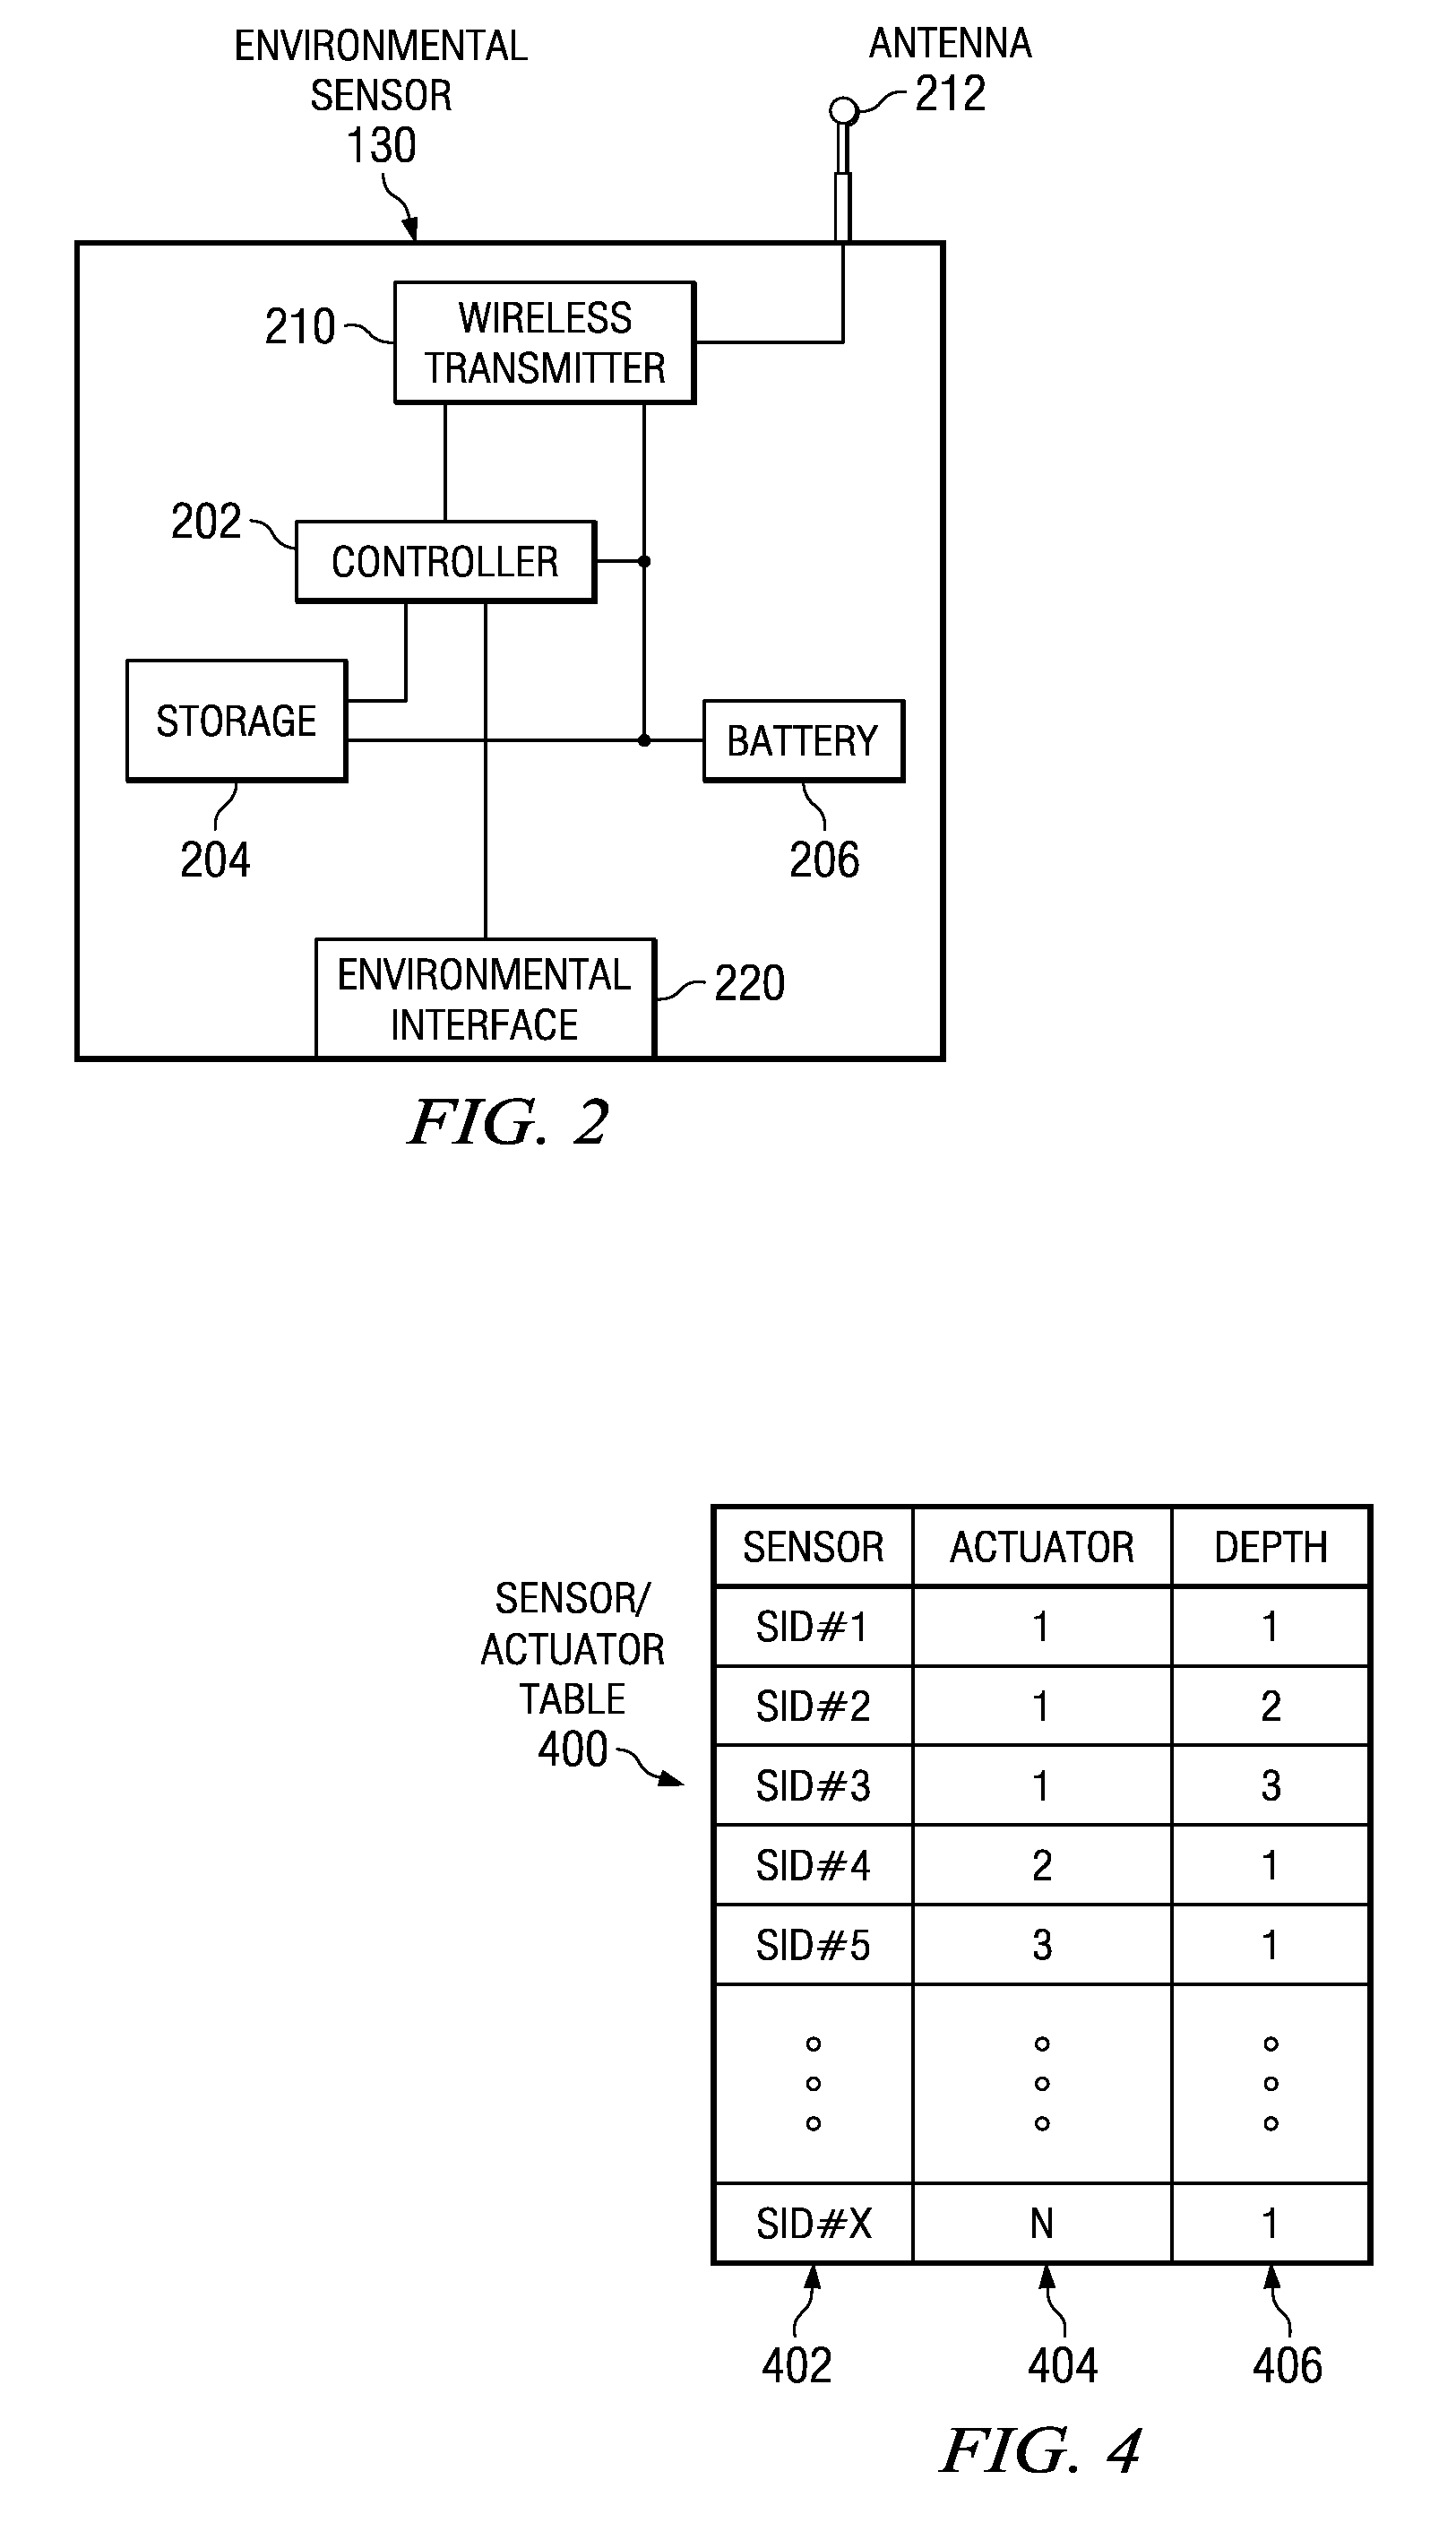 Irrigation system with wireless control